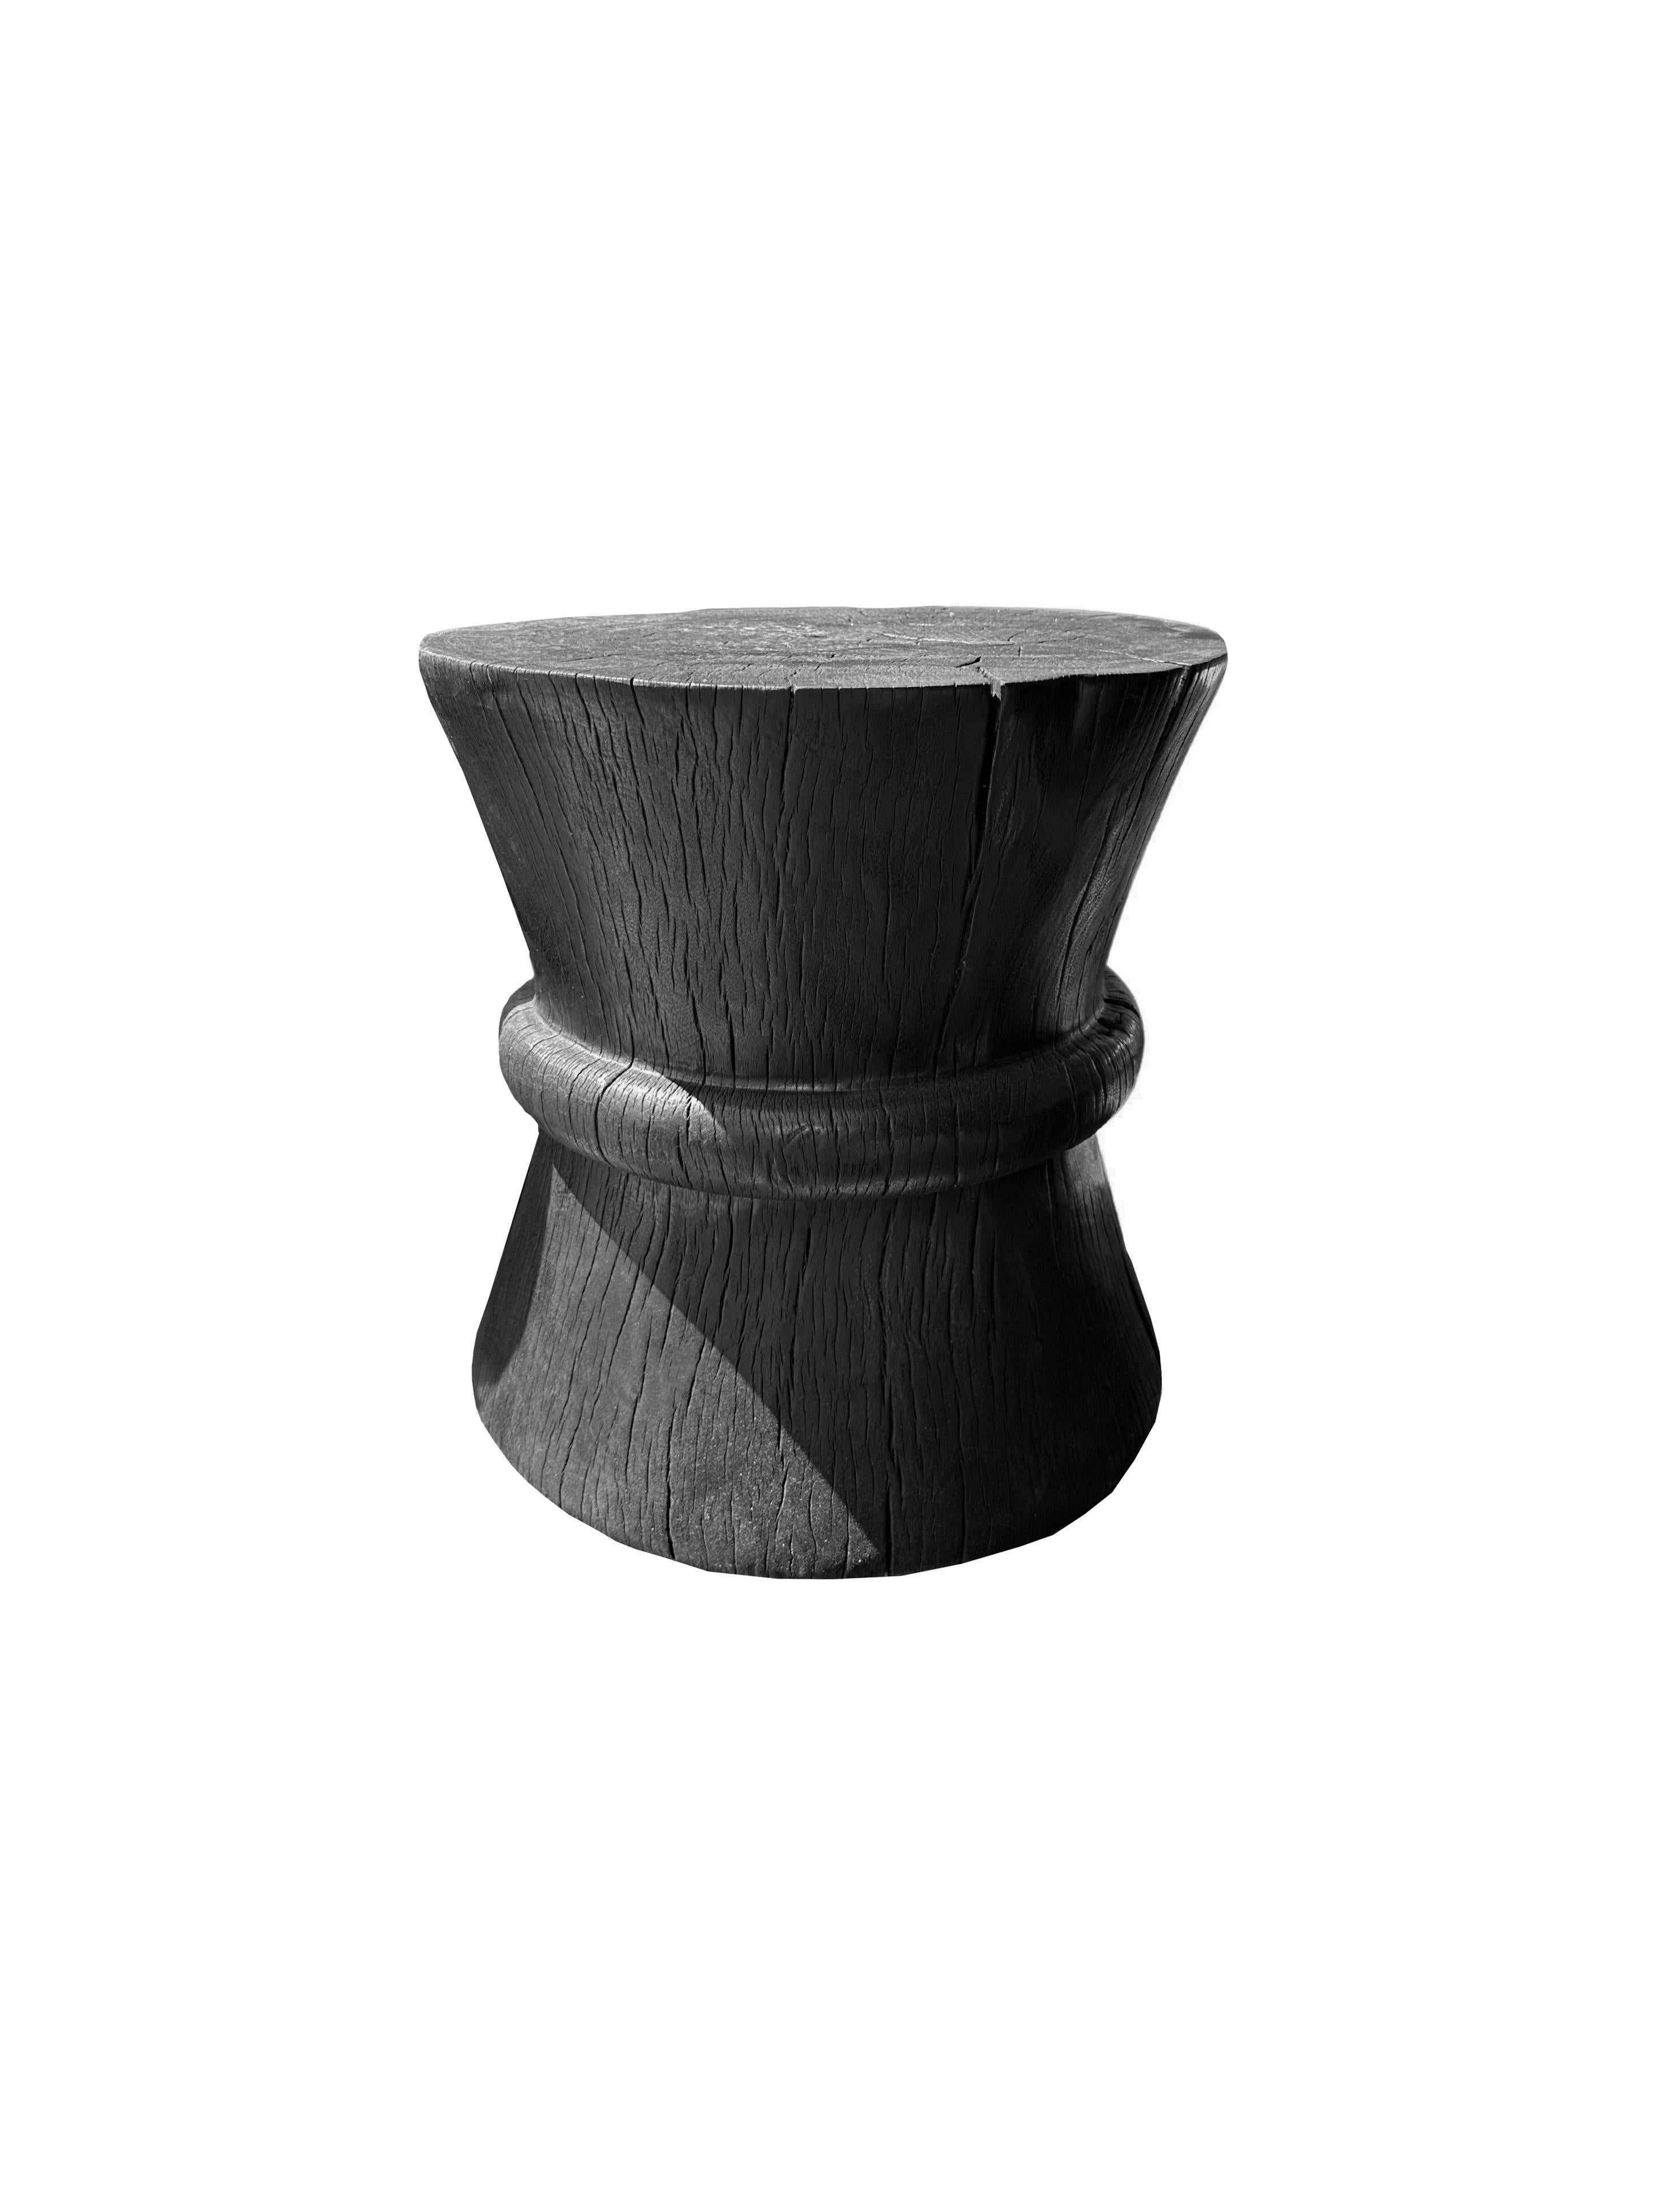 Indonesian Sculptural Solid Tamarind Wood Table, Modern Organic, Burnt Finish For Sale